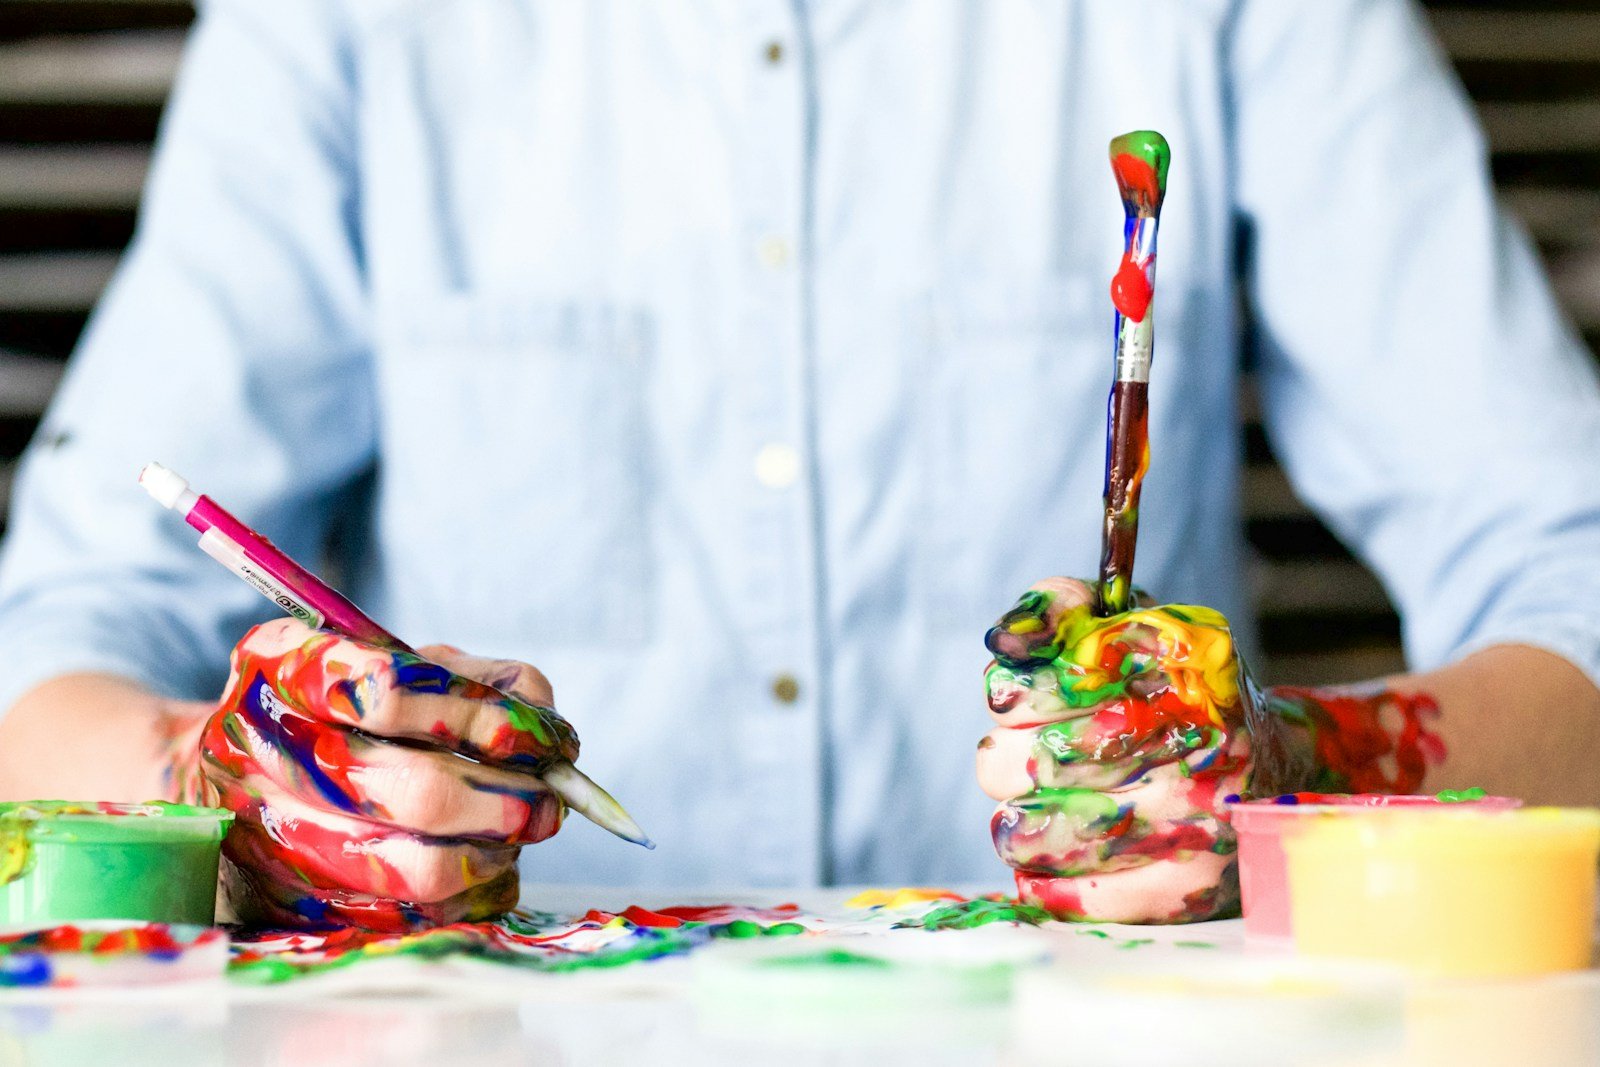 Finding Inspiration: Tips for Overcoming Creative Blocks in Pursuit of Art